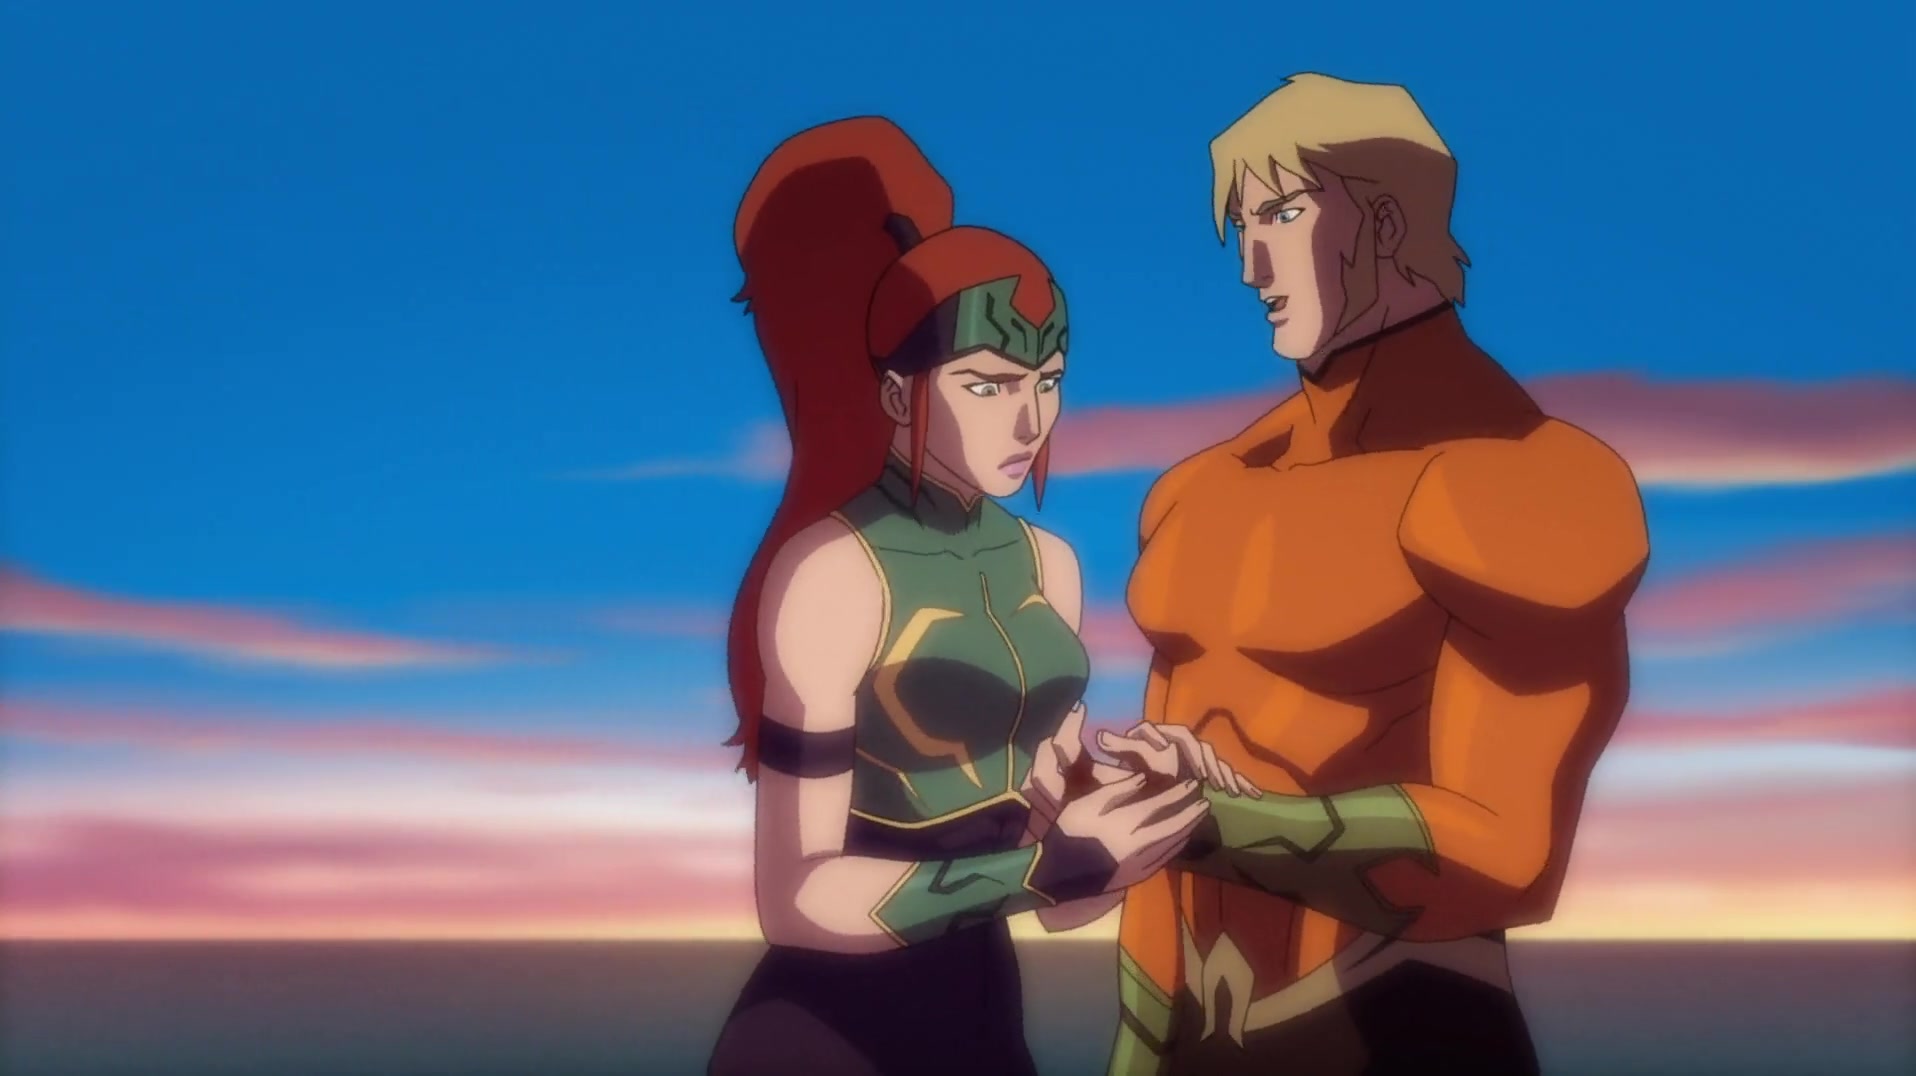 Justice League: Throne Of Atlantis Wallpapers